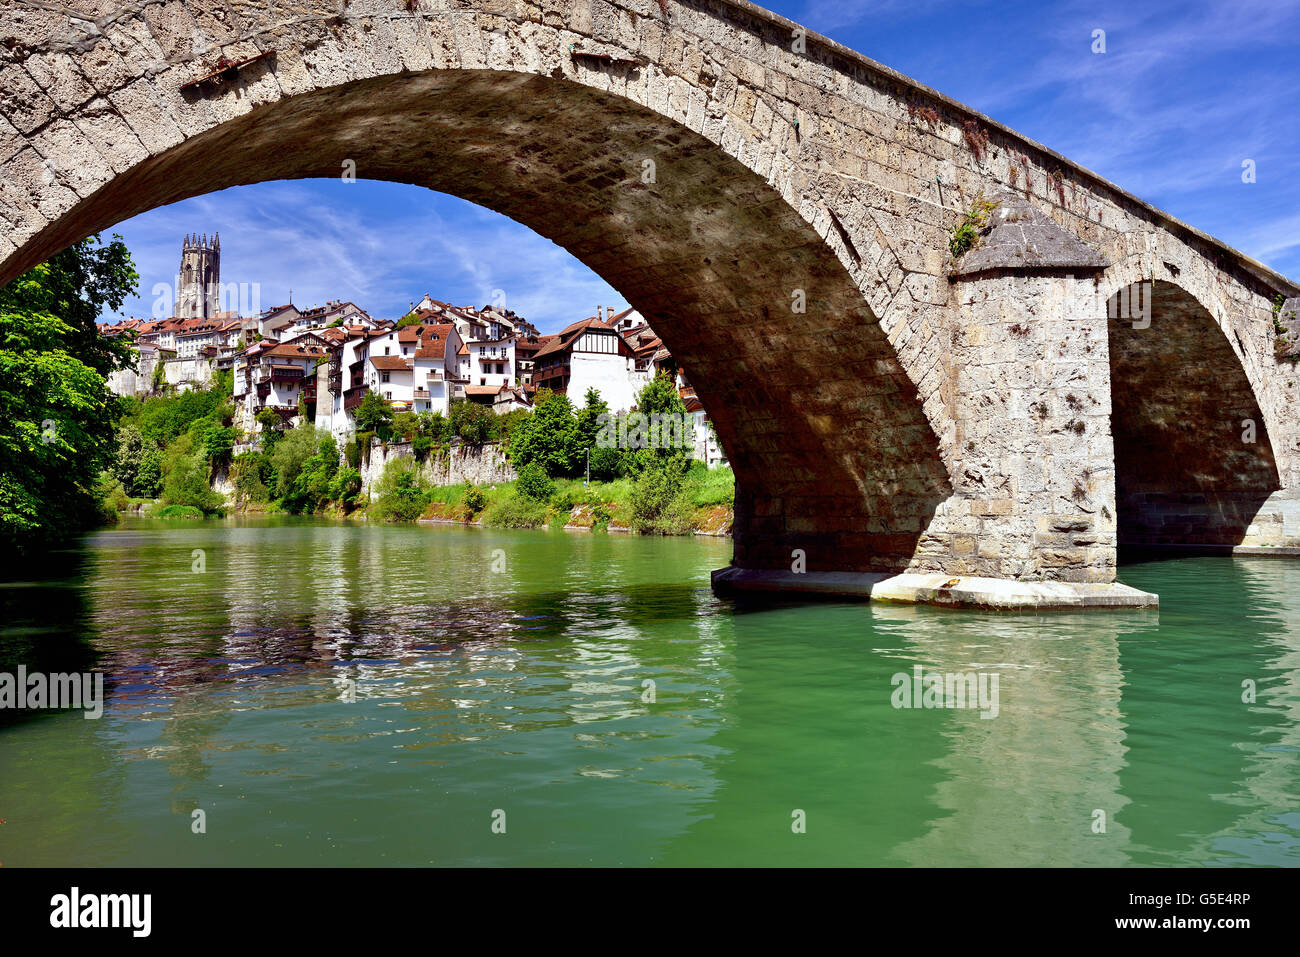 Mittlere Brücke, Pont du Milieu or Middle Bridge and historic centre, Fribourg, Canton of Fribourg, Switzerland Stock Photo